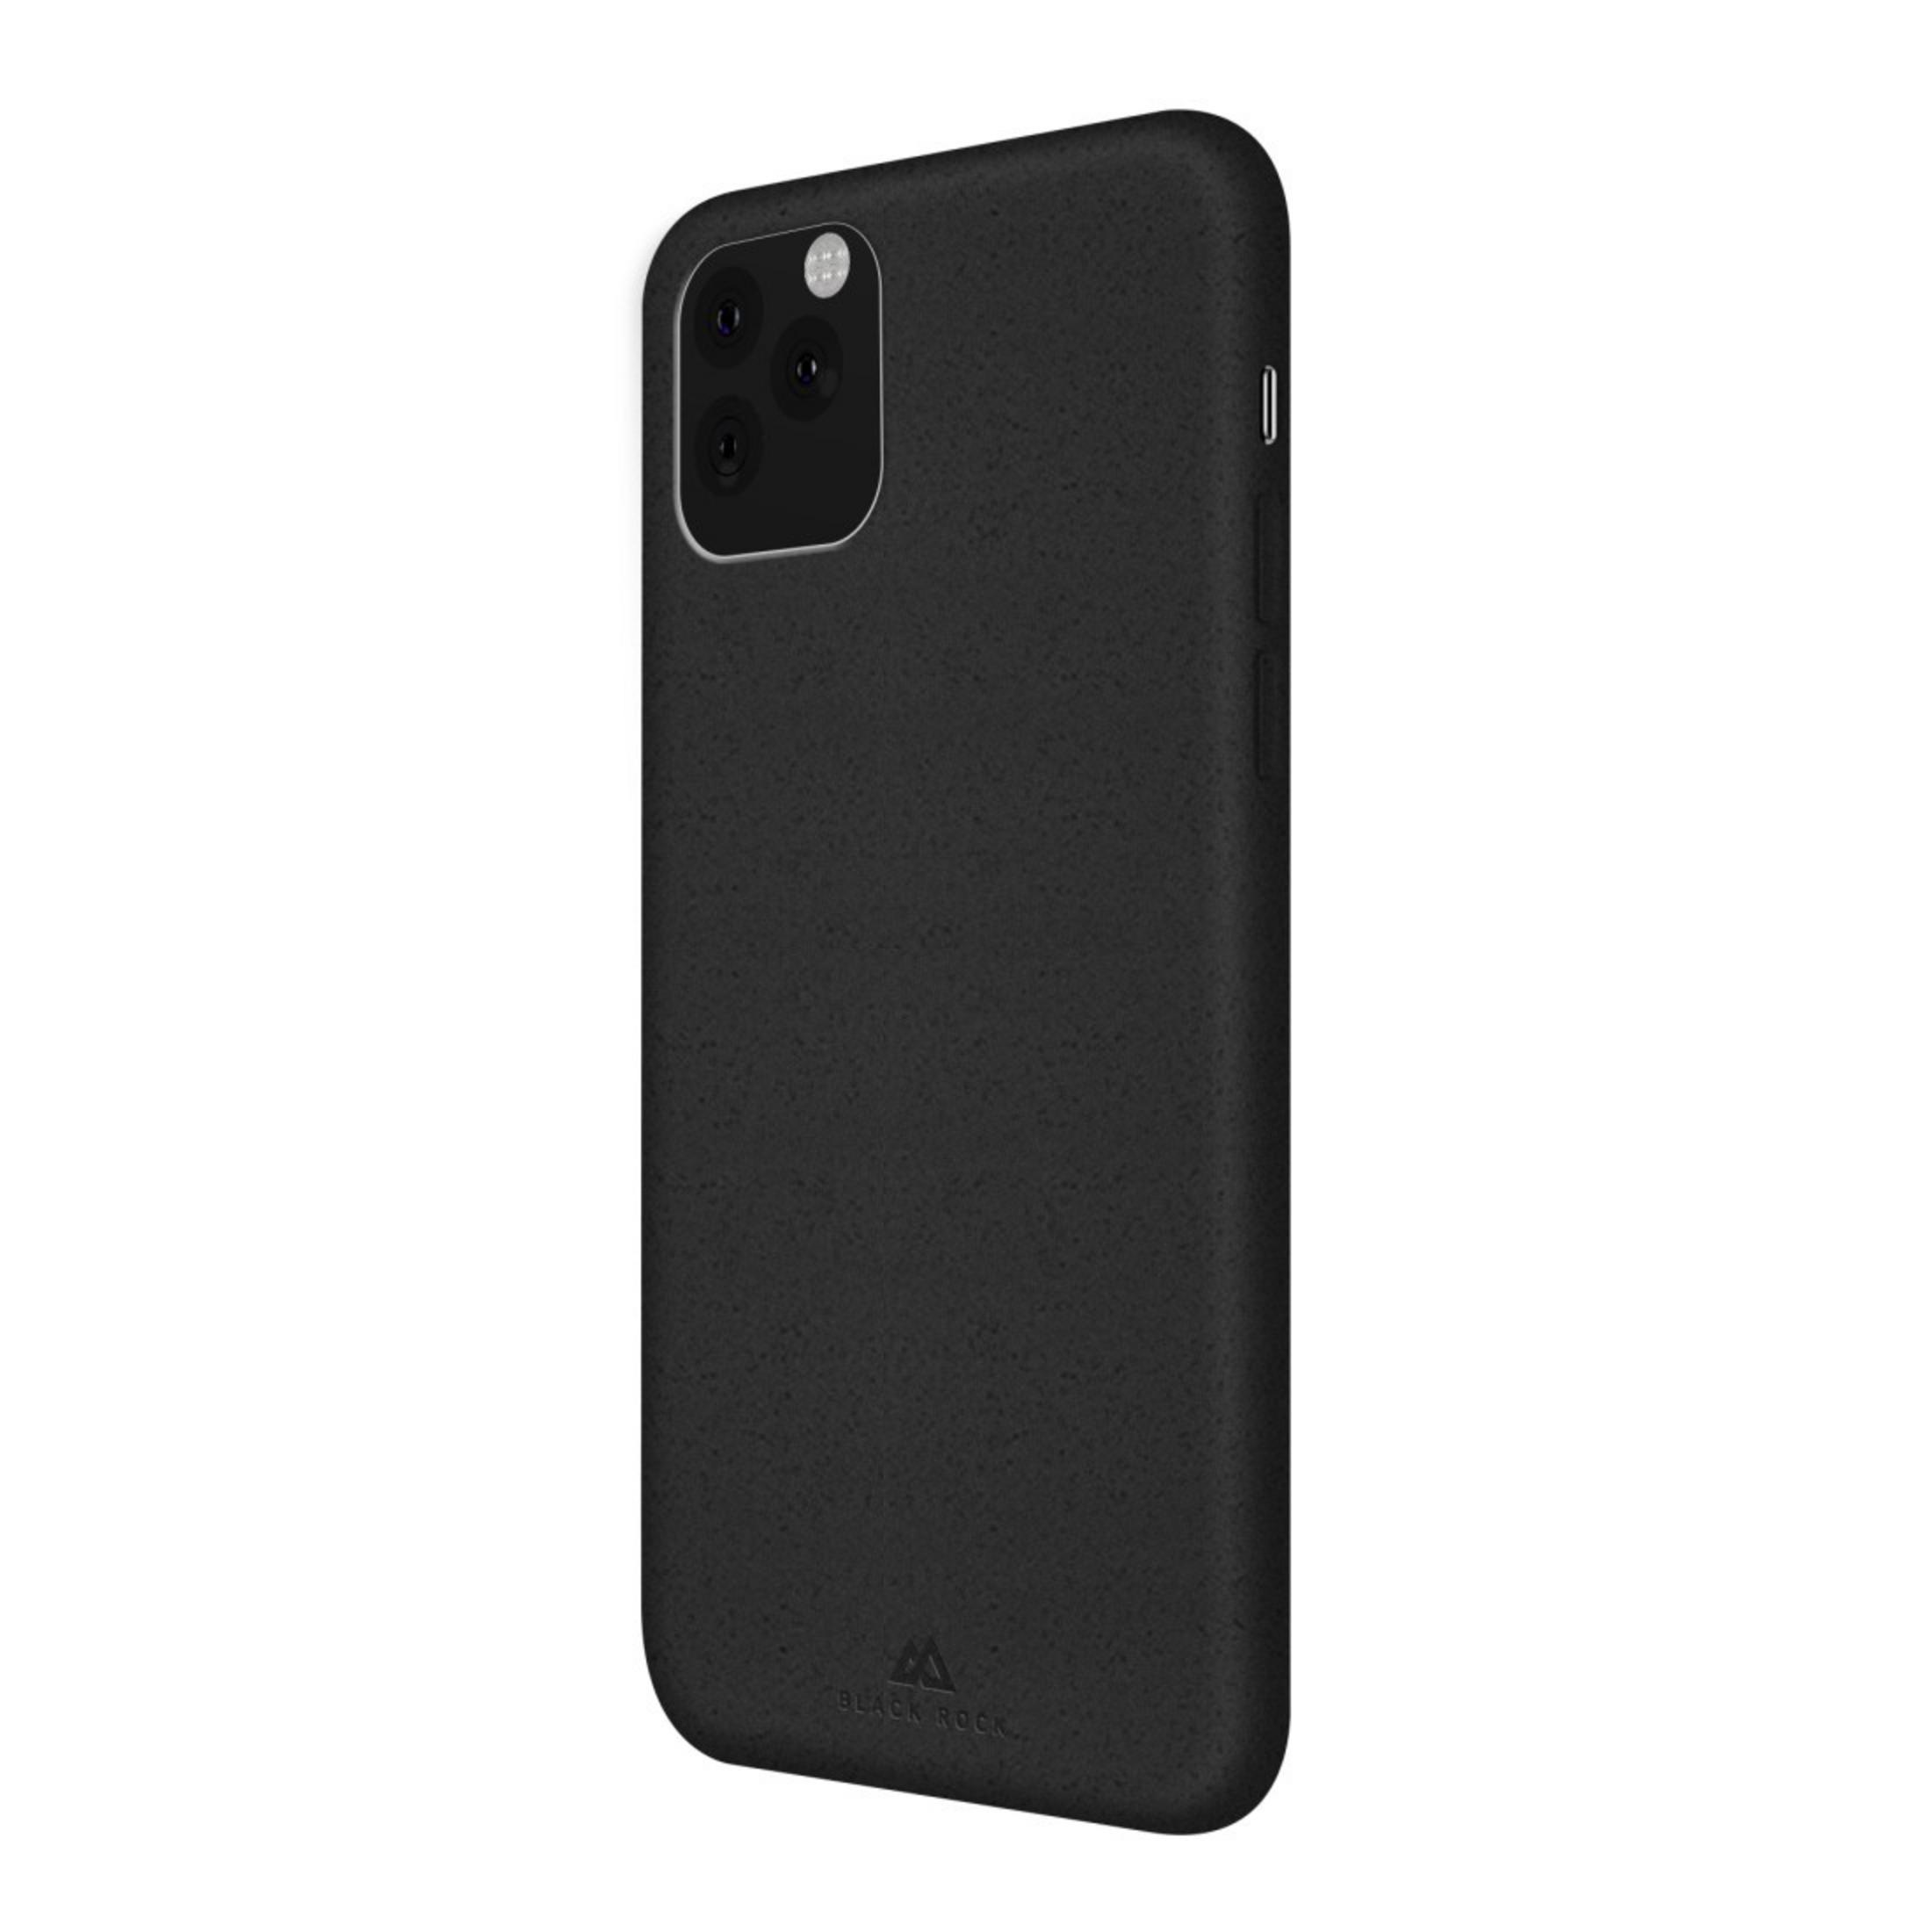 BLACK ROCK 11 ECO Backcover, iPhone Schwarz SW, Max, Pro IPH MAX 187029 Apple, CO 11